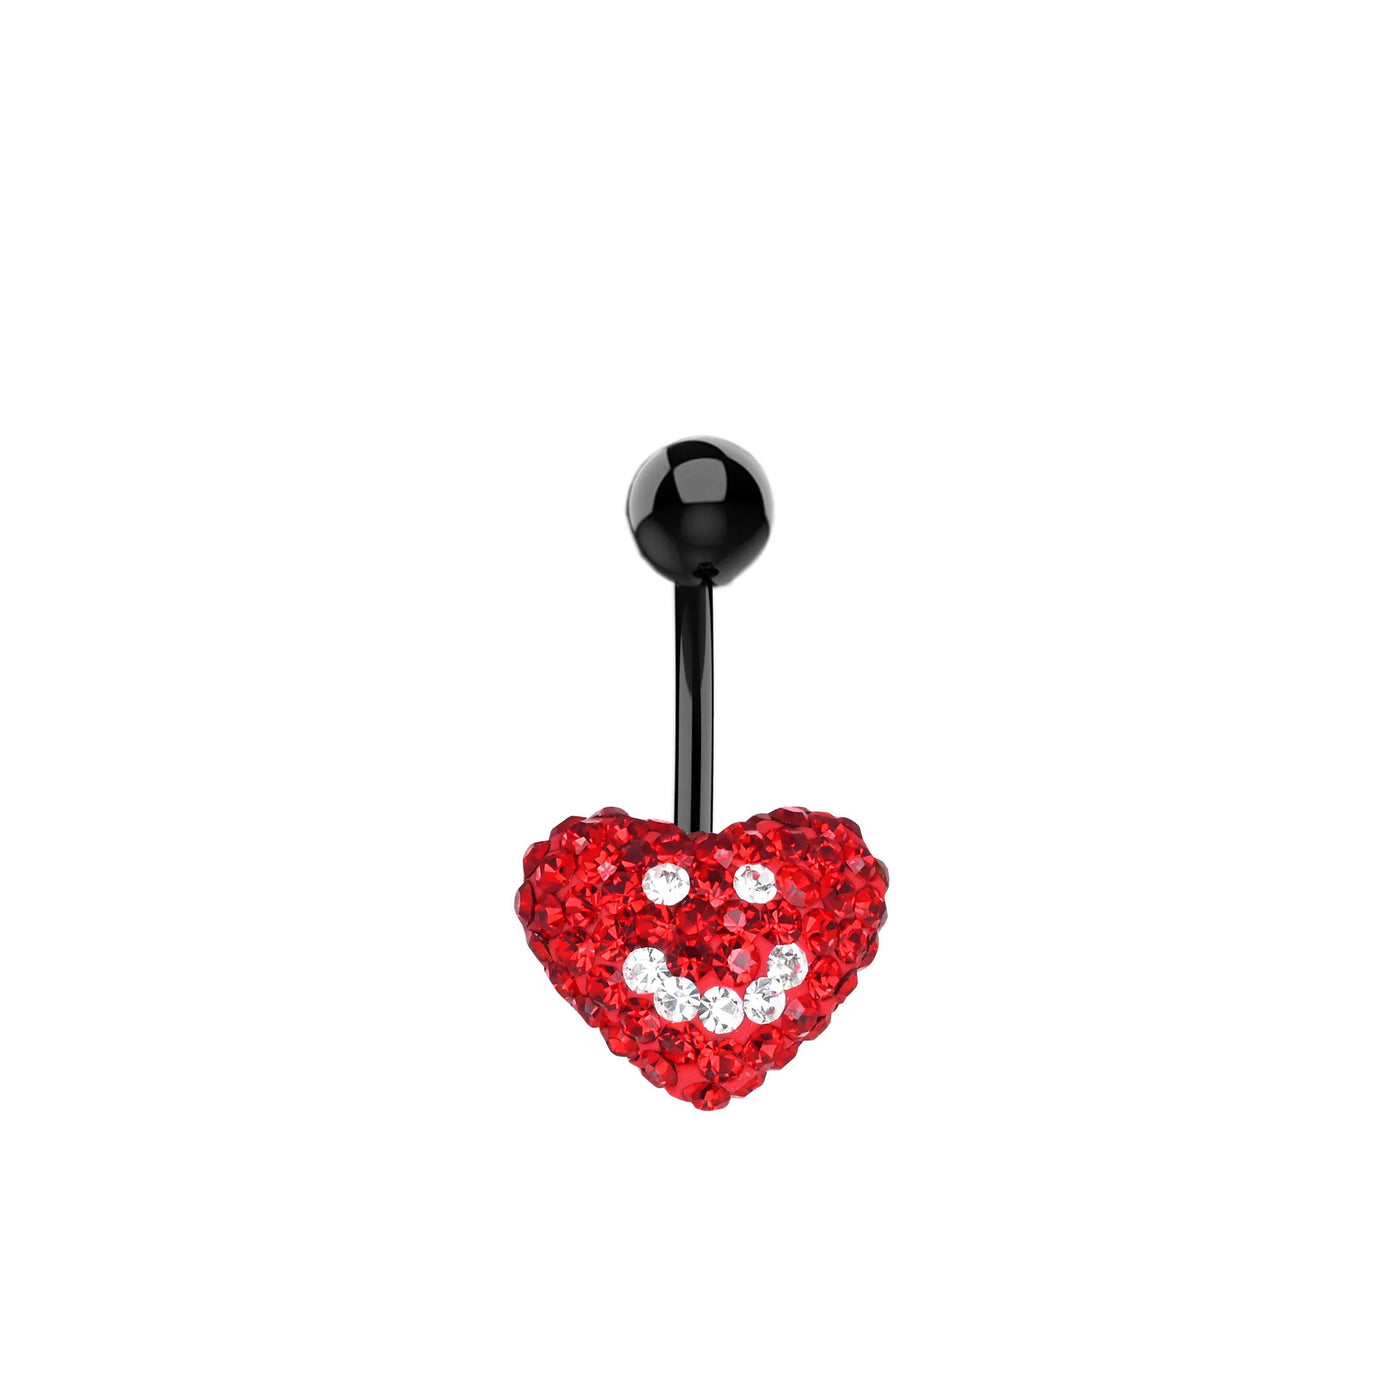 Crystal Red Heart Belly Button Ring